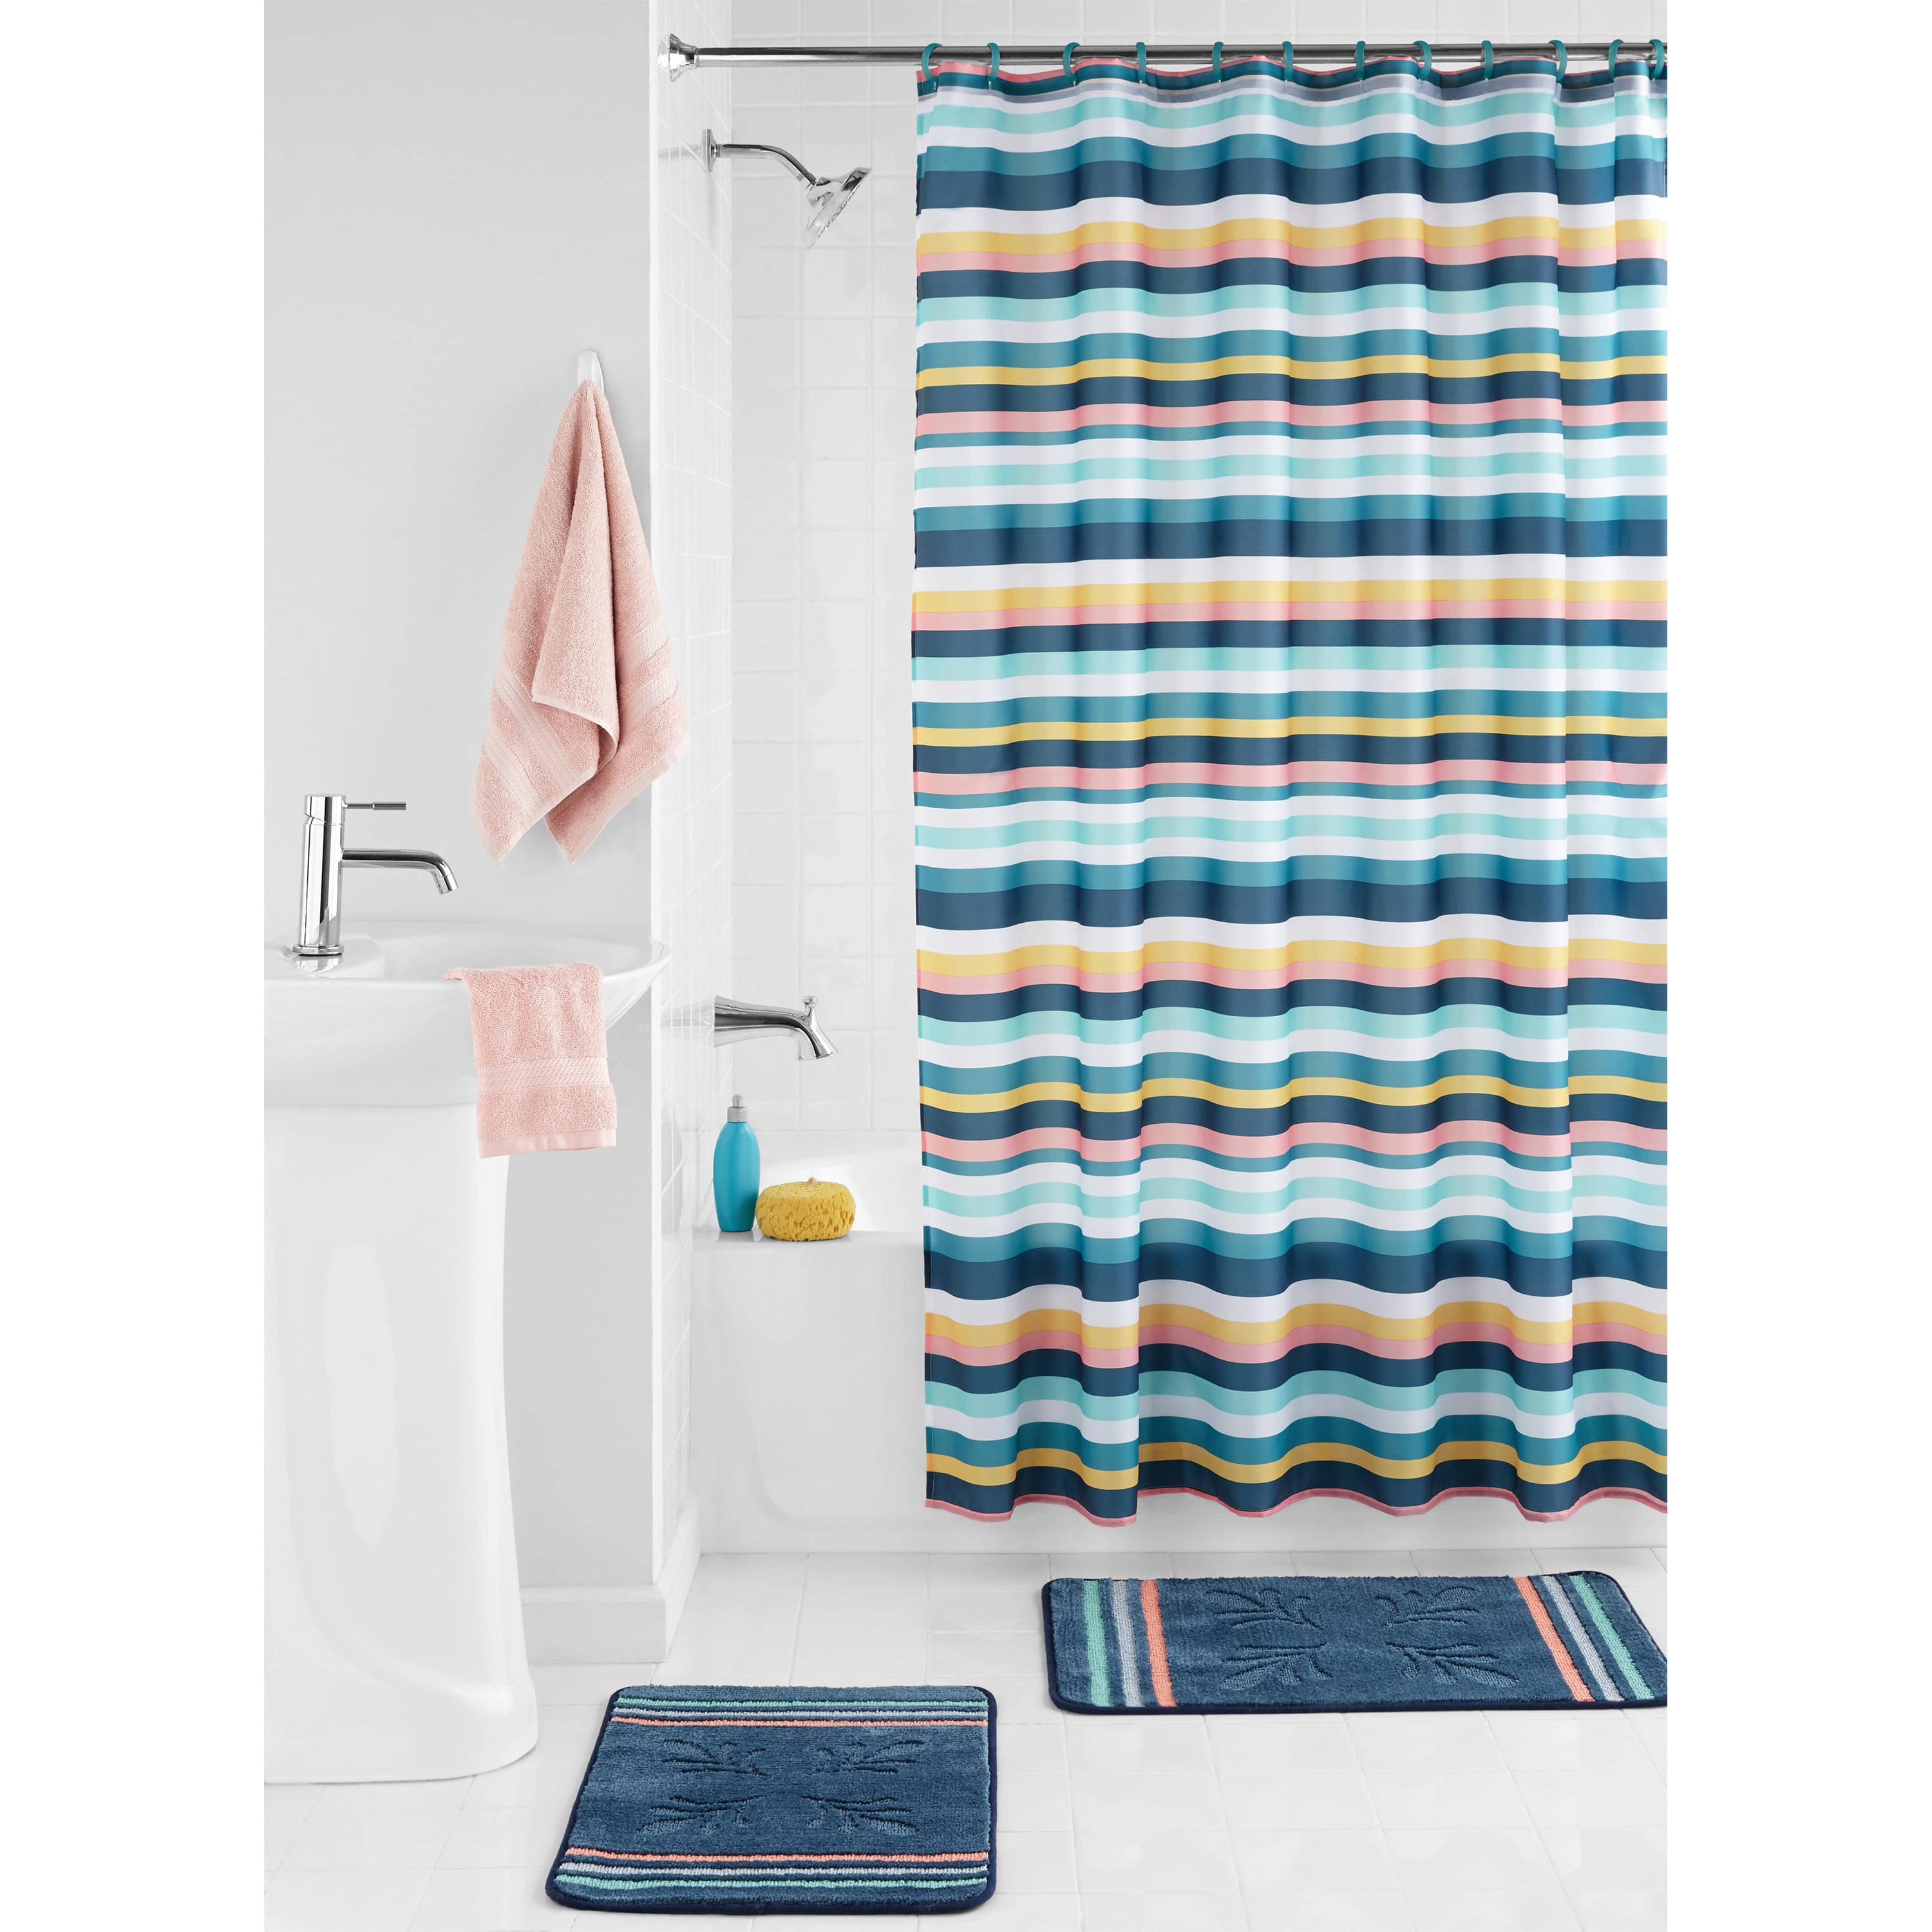 Fresh and Bright Color Stripes Shower Curtain Set Waterproof Fabric Bathroom Mat 